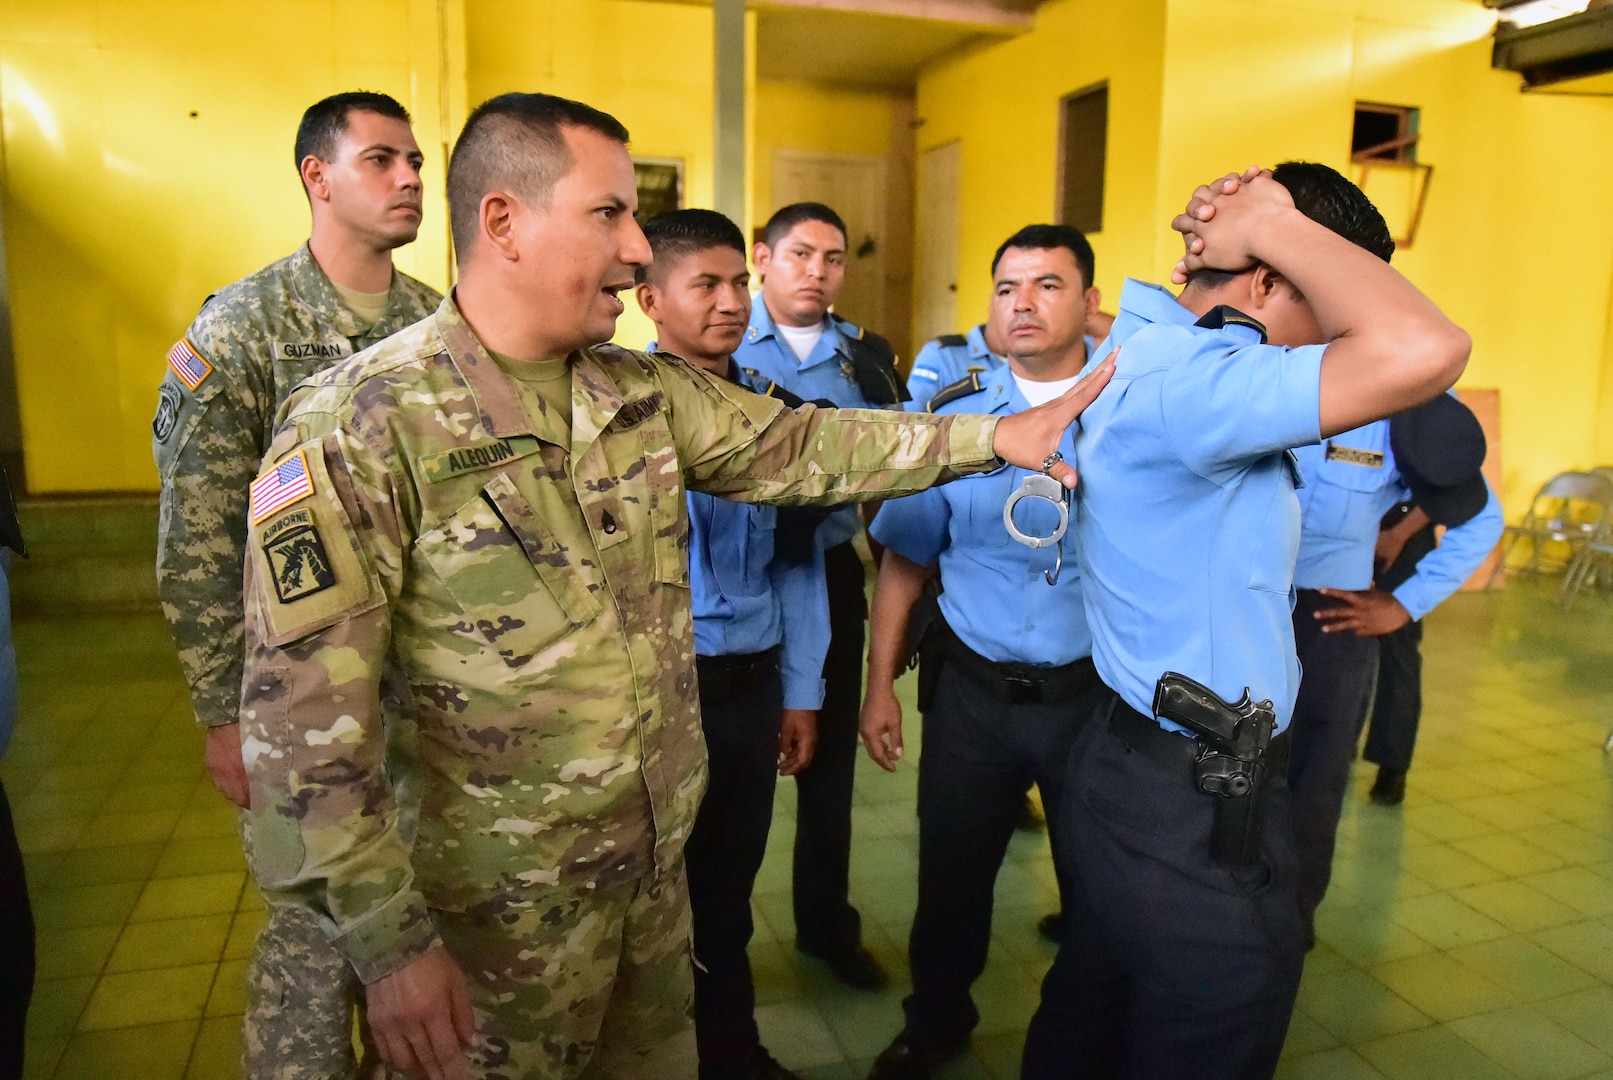 Staff Sgt. José Alequin, Joint Task Force-Bravo Joint Security Forces, shows participants how to properly immobilize a person during a Subject Matter Expert Exchange between JSF and local public forces in Comayagua.